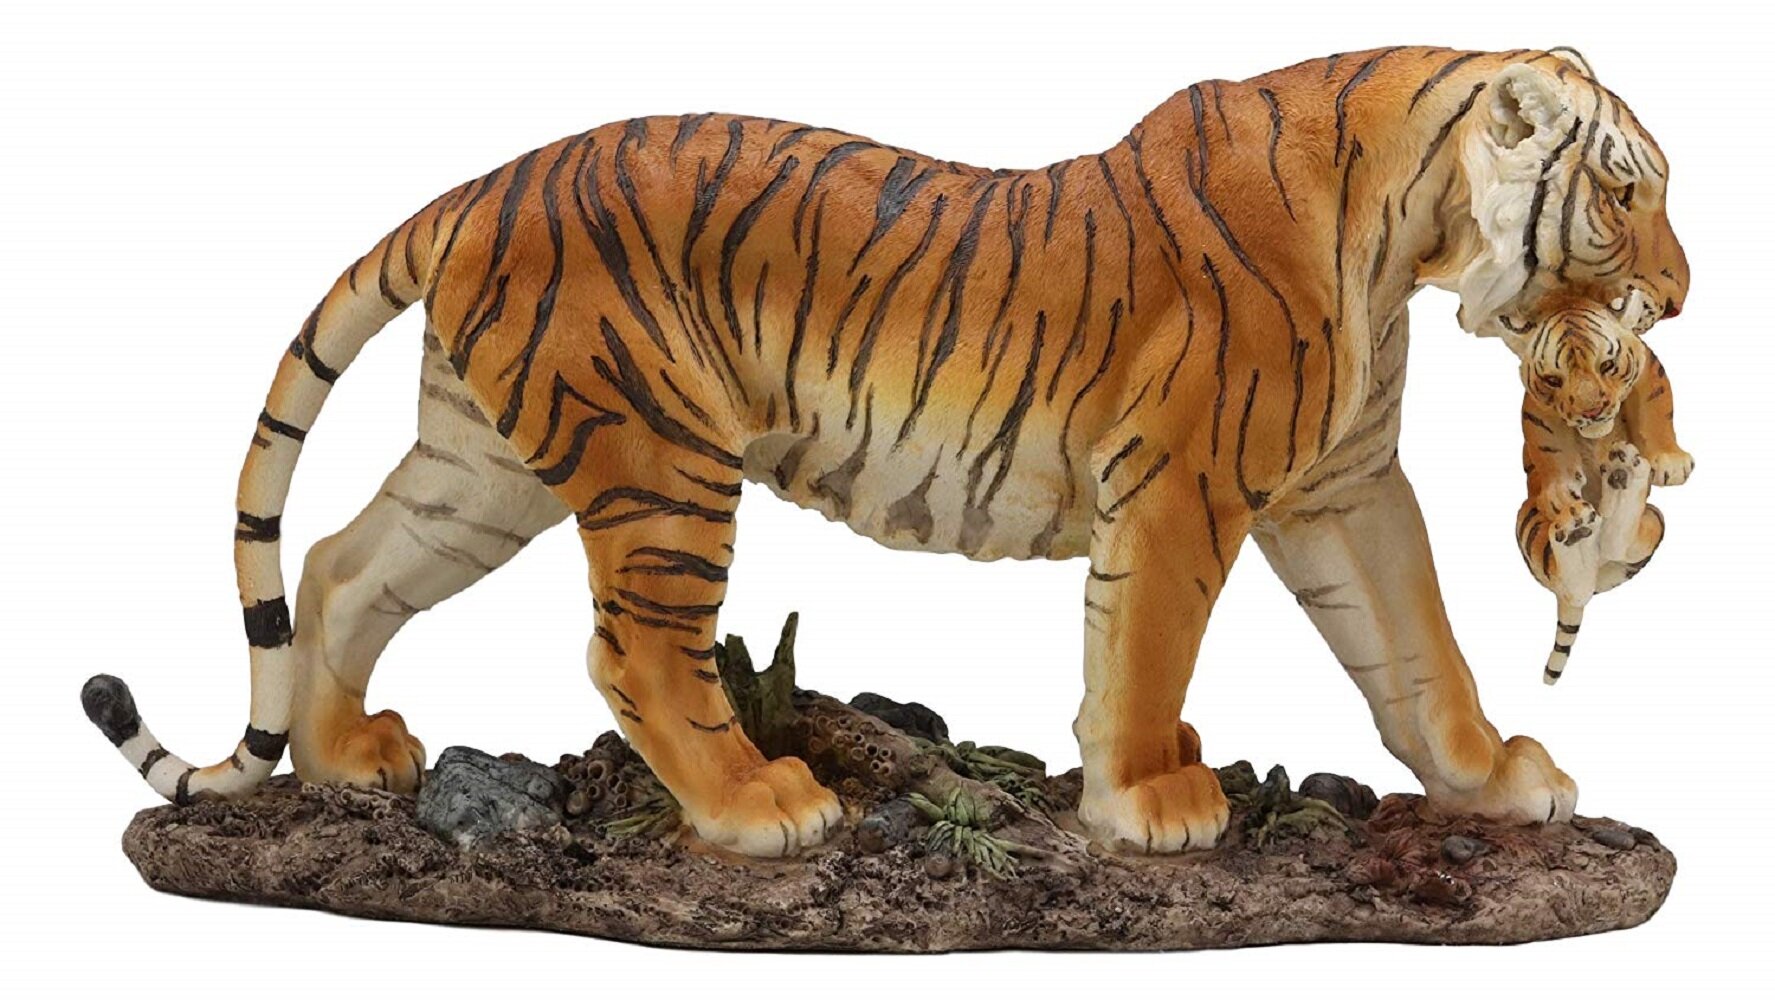 4,223 Mother Tiger Images, Stock Photos, 3D objects, & Vectors